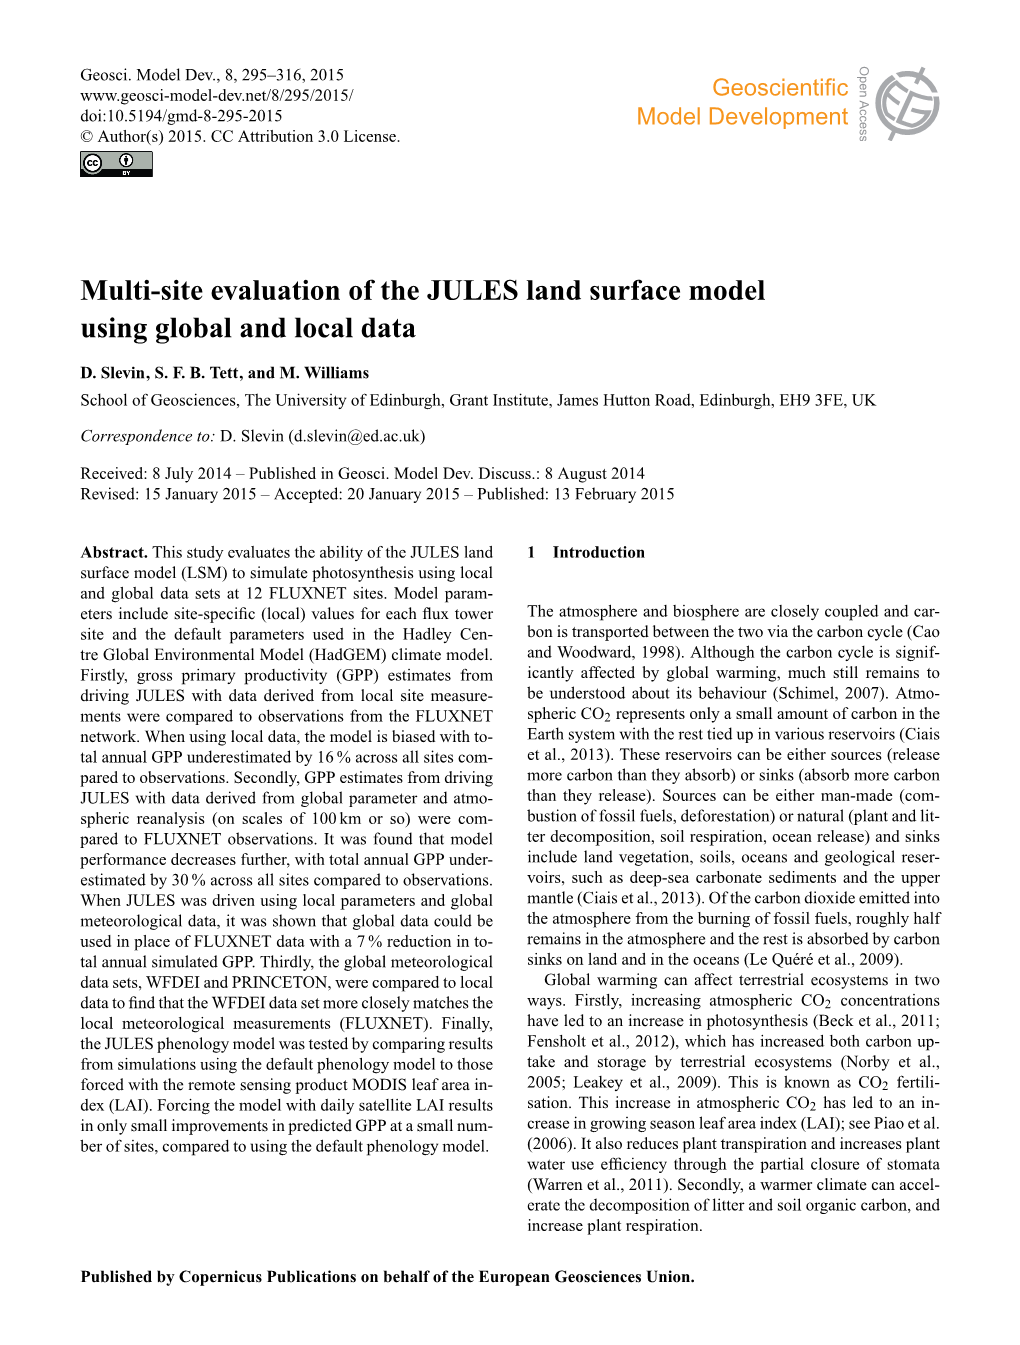 Multi-Site Evaluation of the JULES Land Surface Model Using Global and Local Data